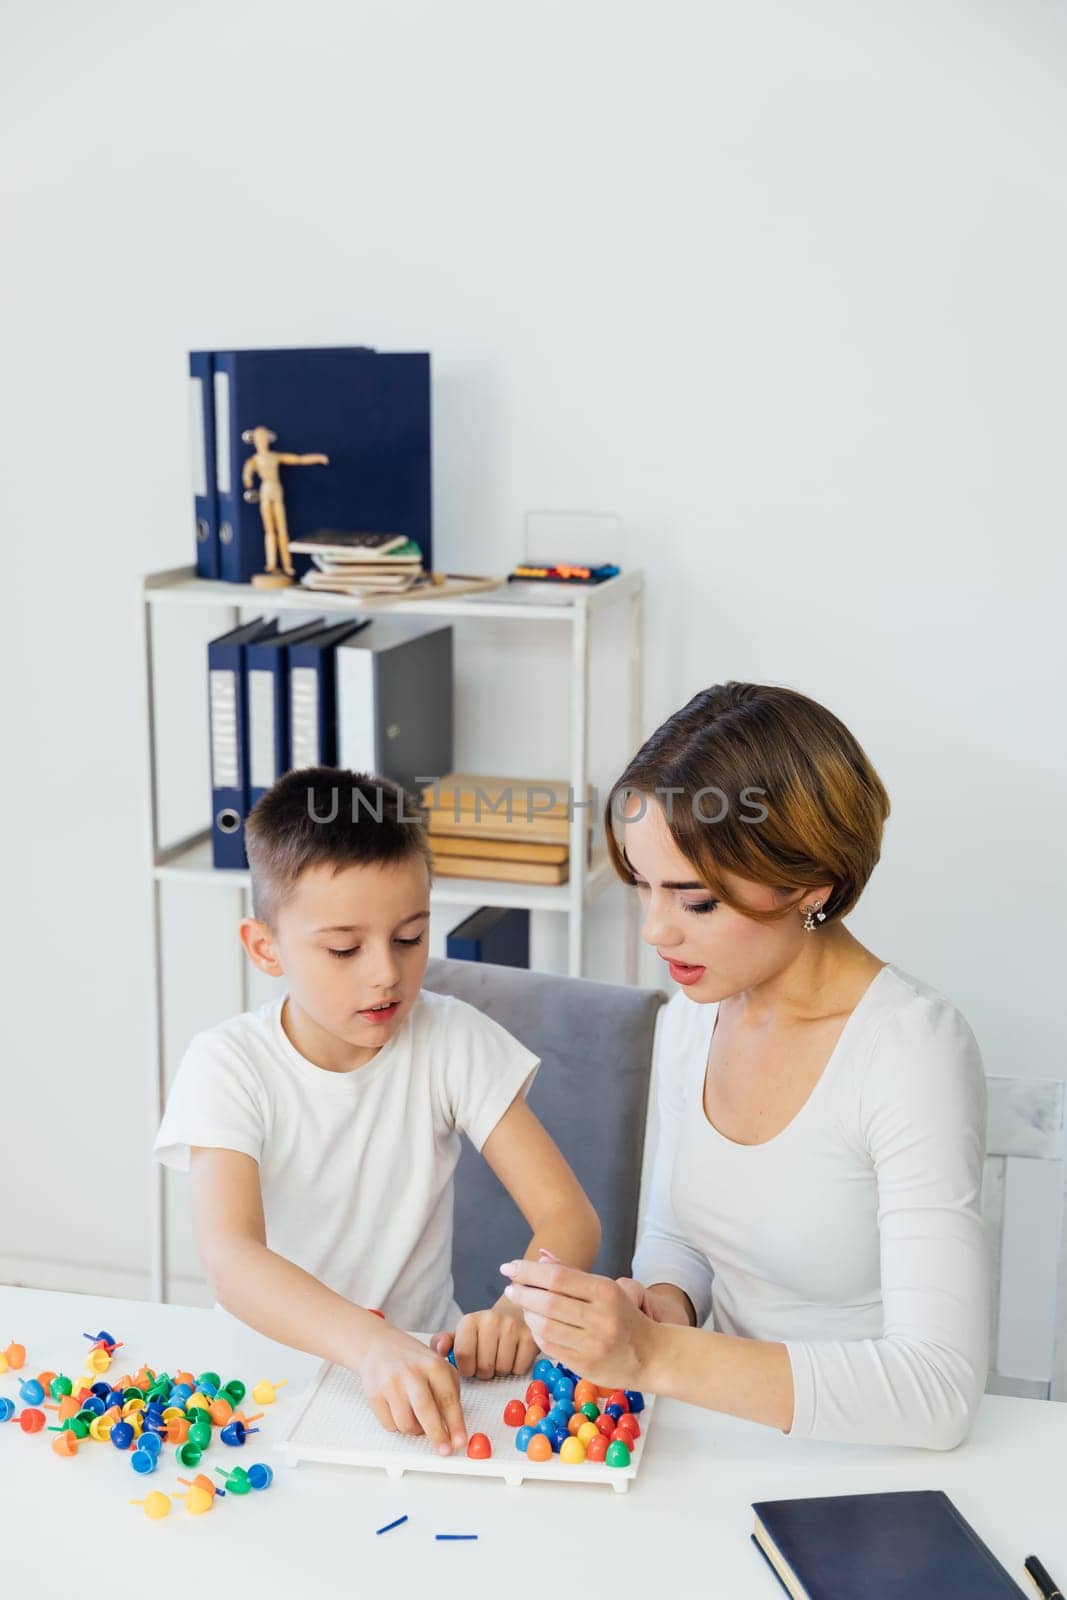 a child psychologist is engaged with a child in the office by Simakov